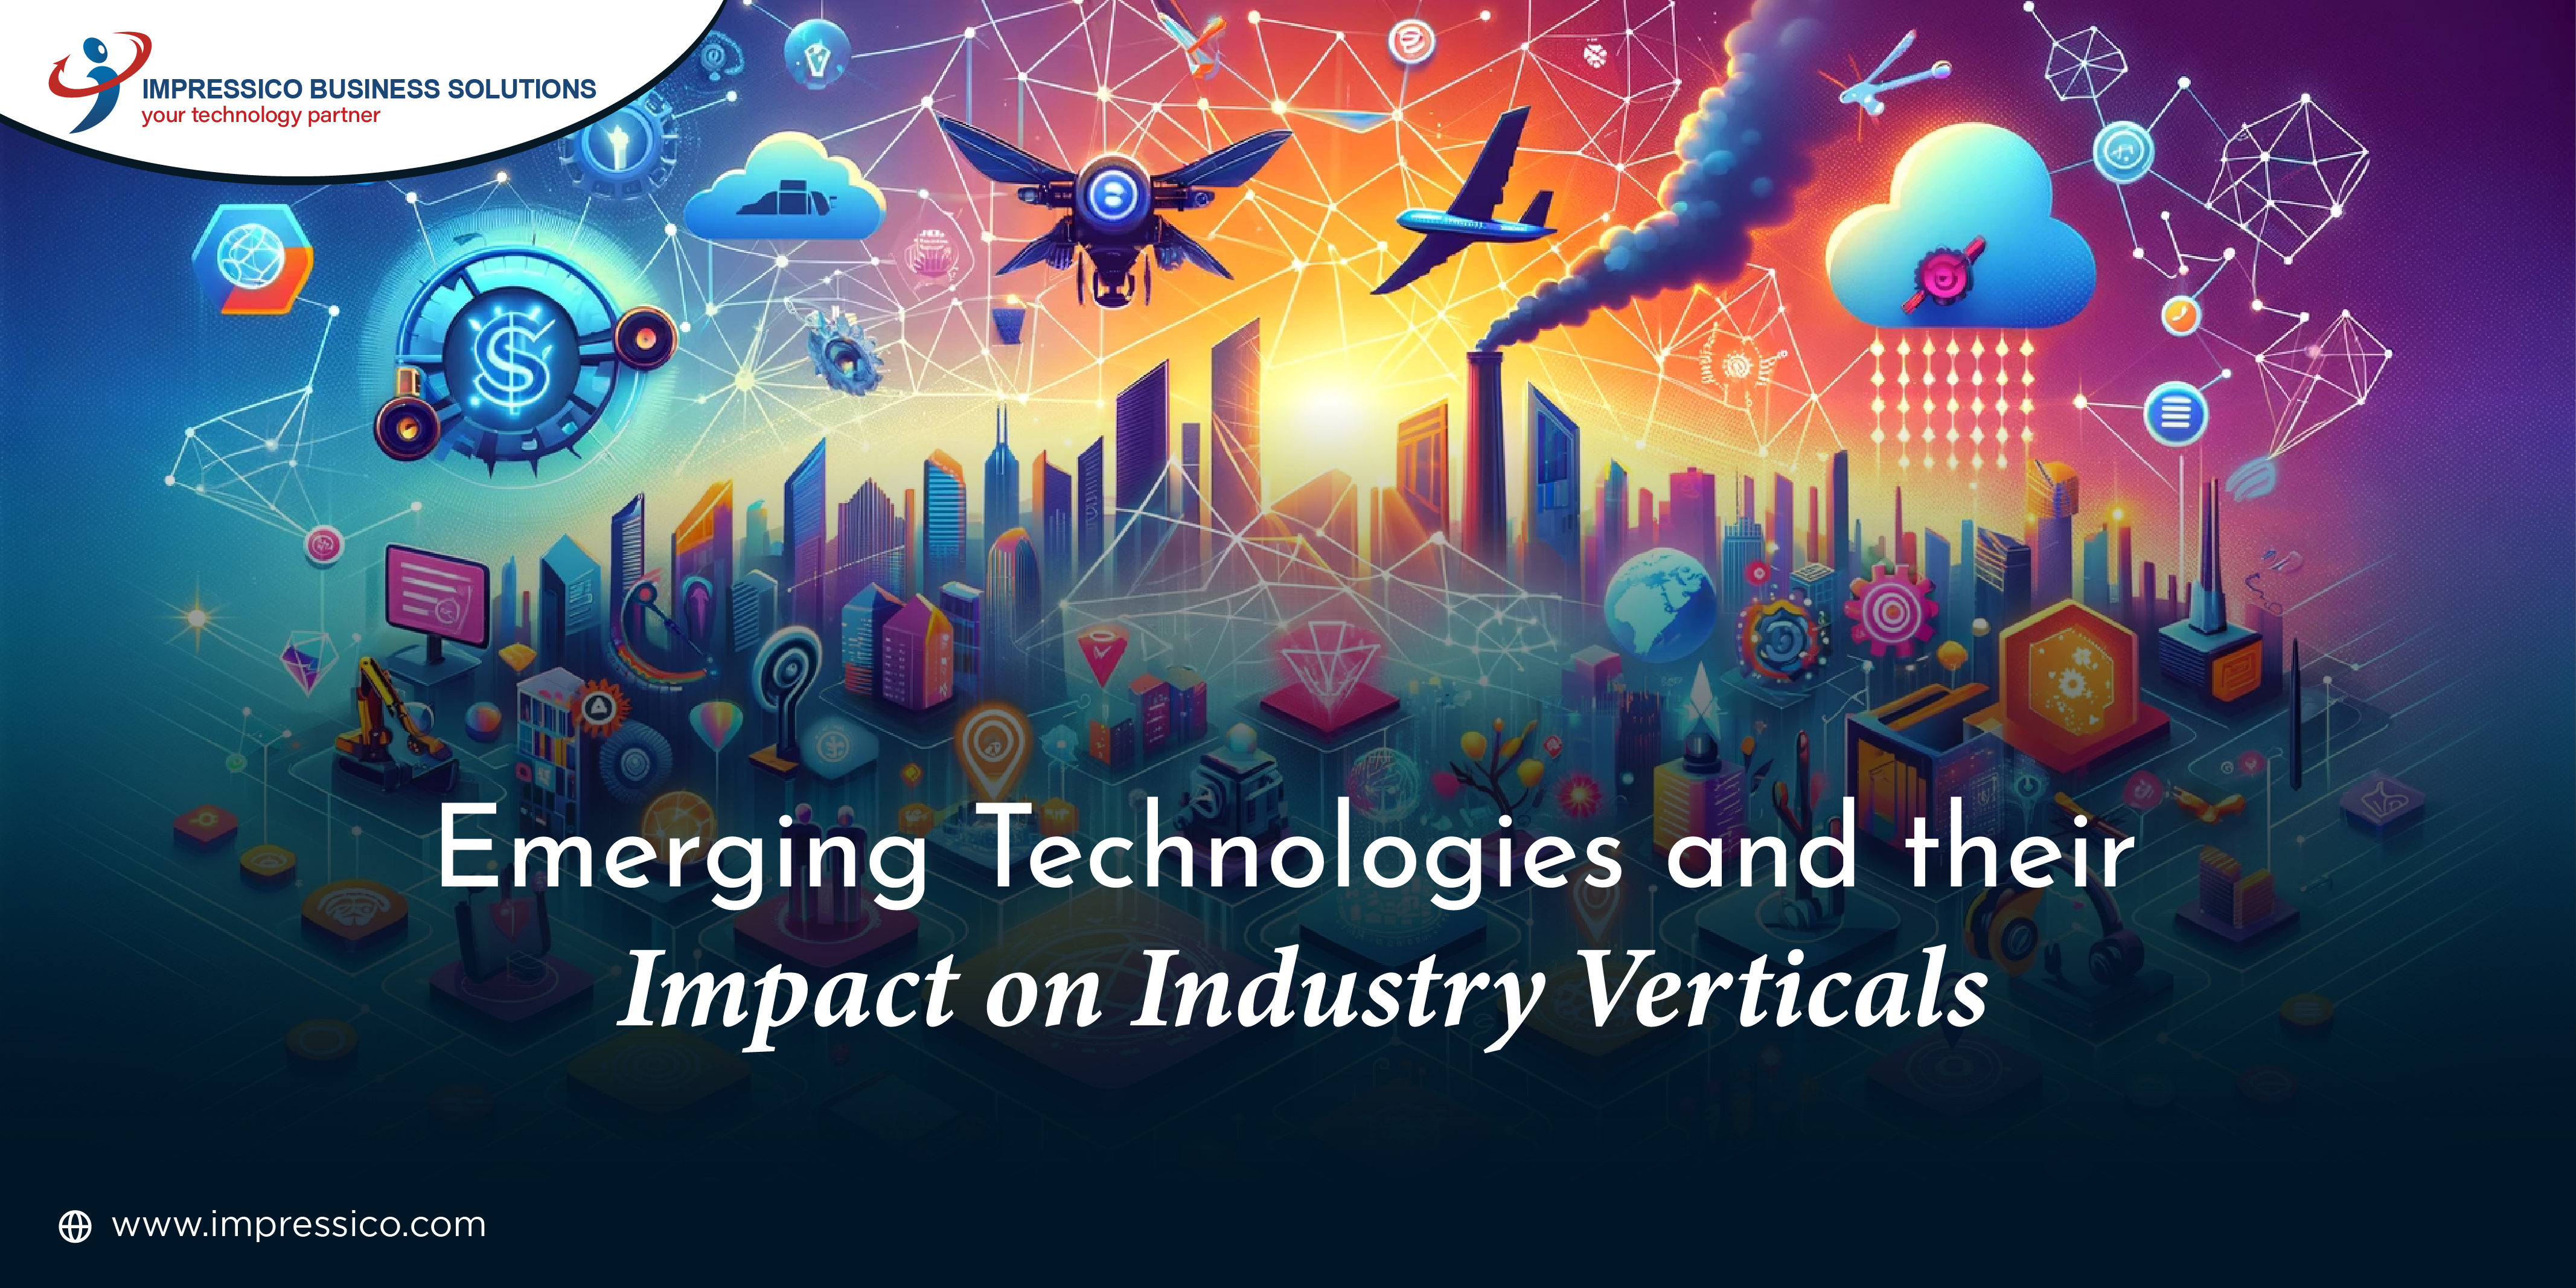 Emerging Technologies and their Impact